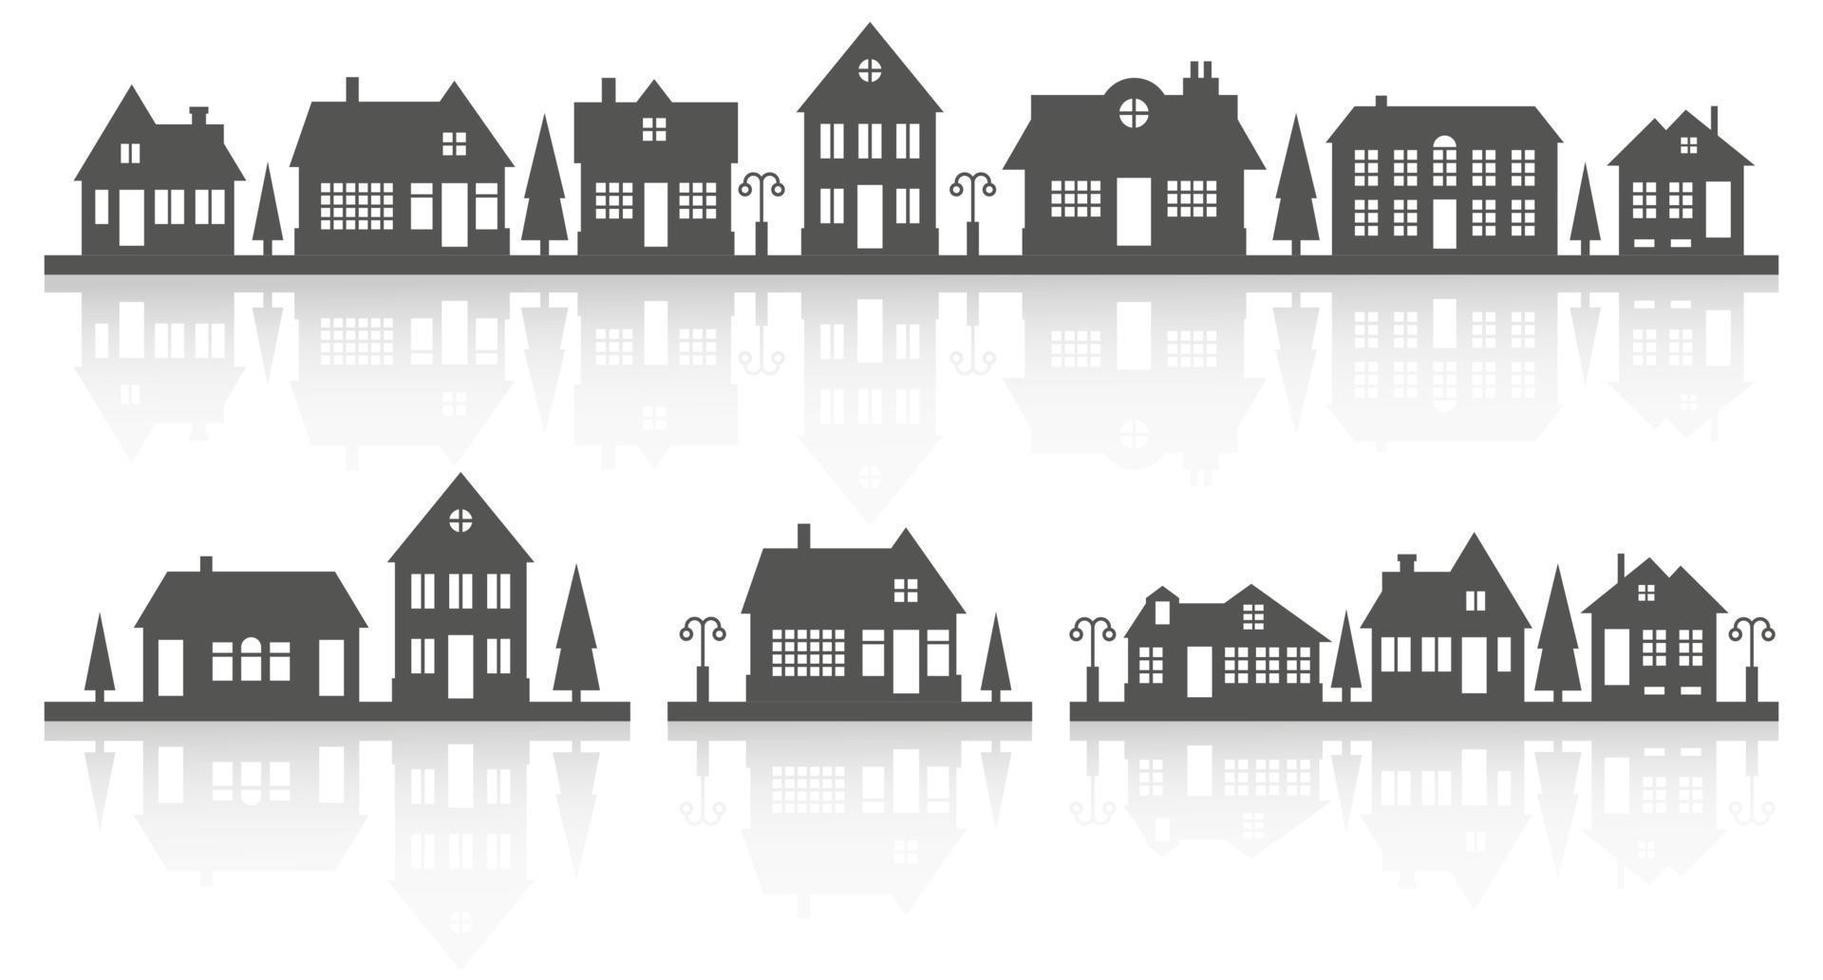 Silhouette of houses on the skyline. Suburban neighborhood landscape. Countryside cottage homes with reflection. Glyph vector illustration.